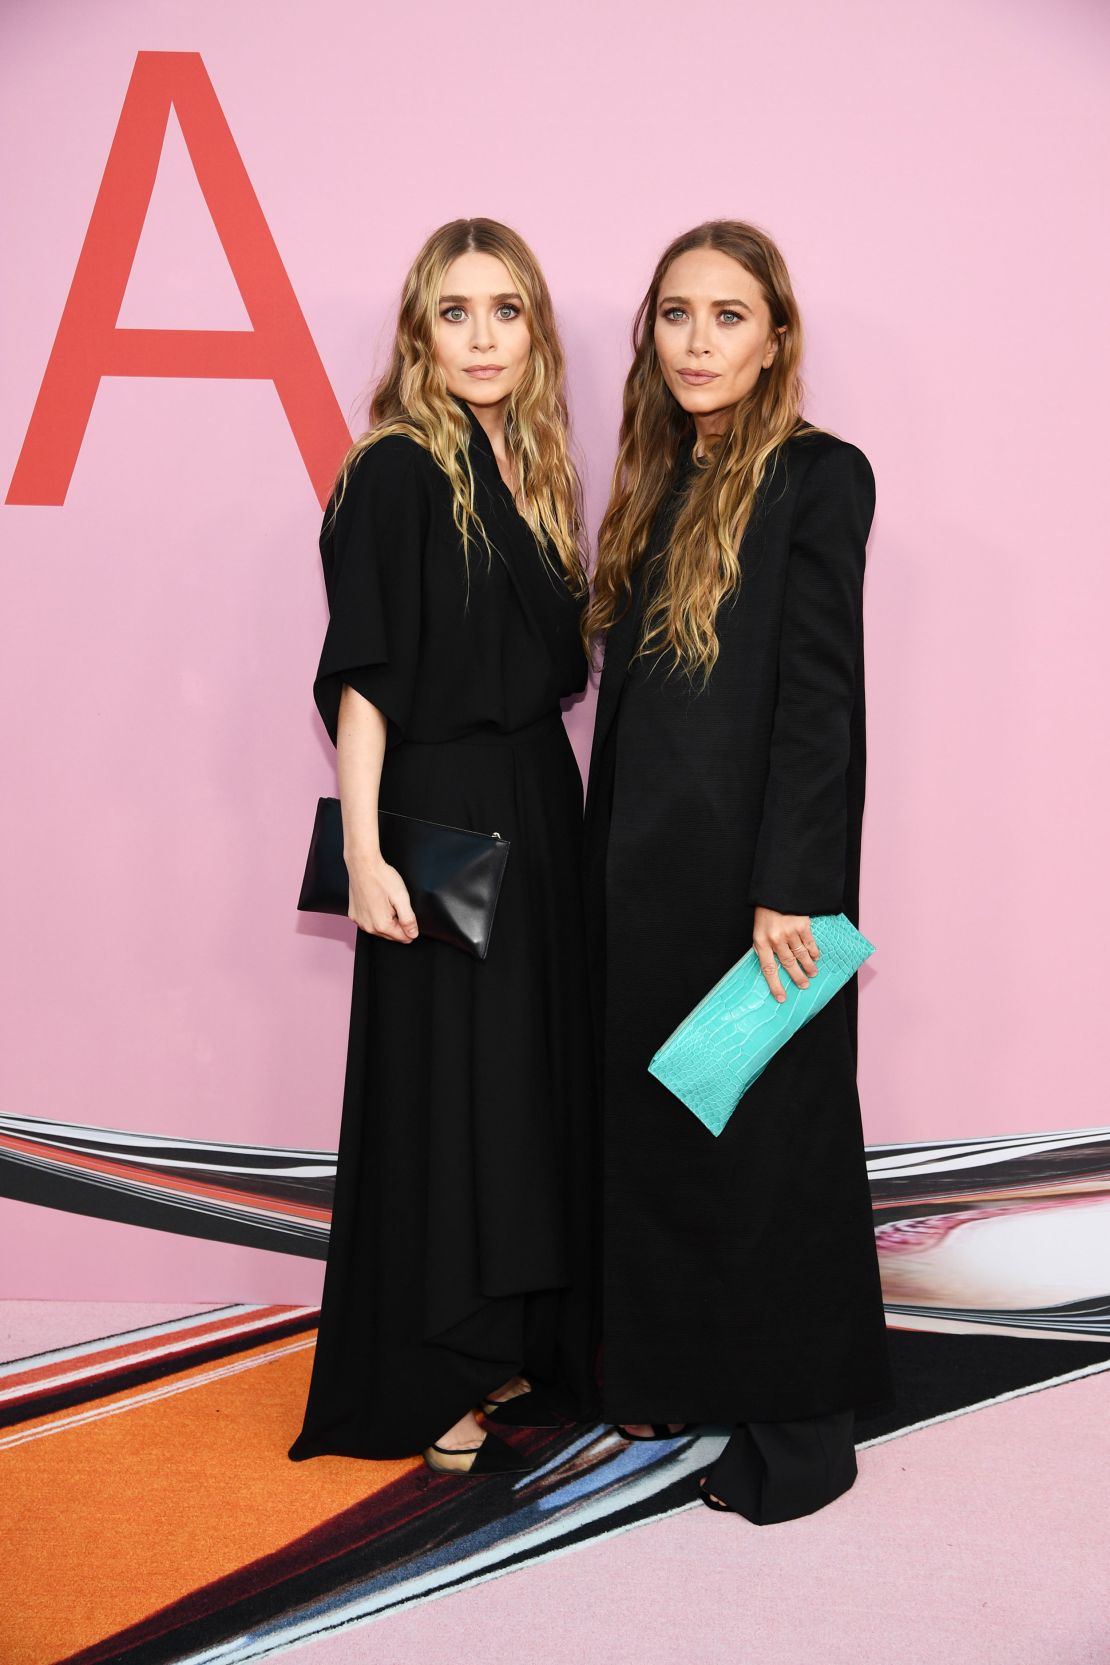 NEW YORK, NEW YORK - JUNE 03: Ashley Olsen and Mary-Kate Olsen attend the CFDA Fashion Awards at the Brooklyn Museum of Art on June 03, 2019 in New York City. (Photo by Dimitrios Kambouris/Getty Images)